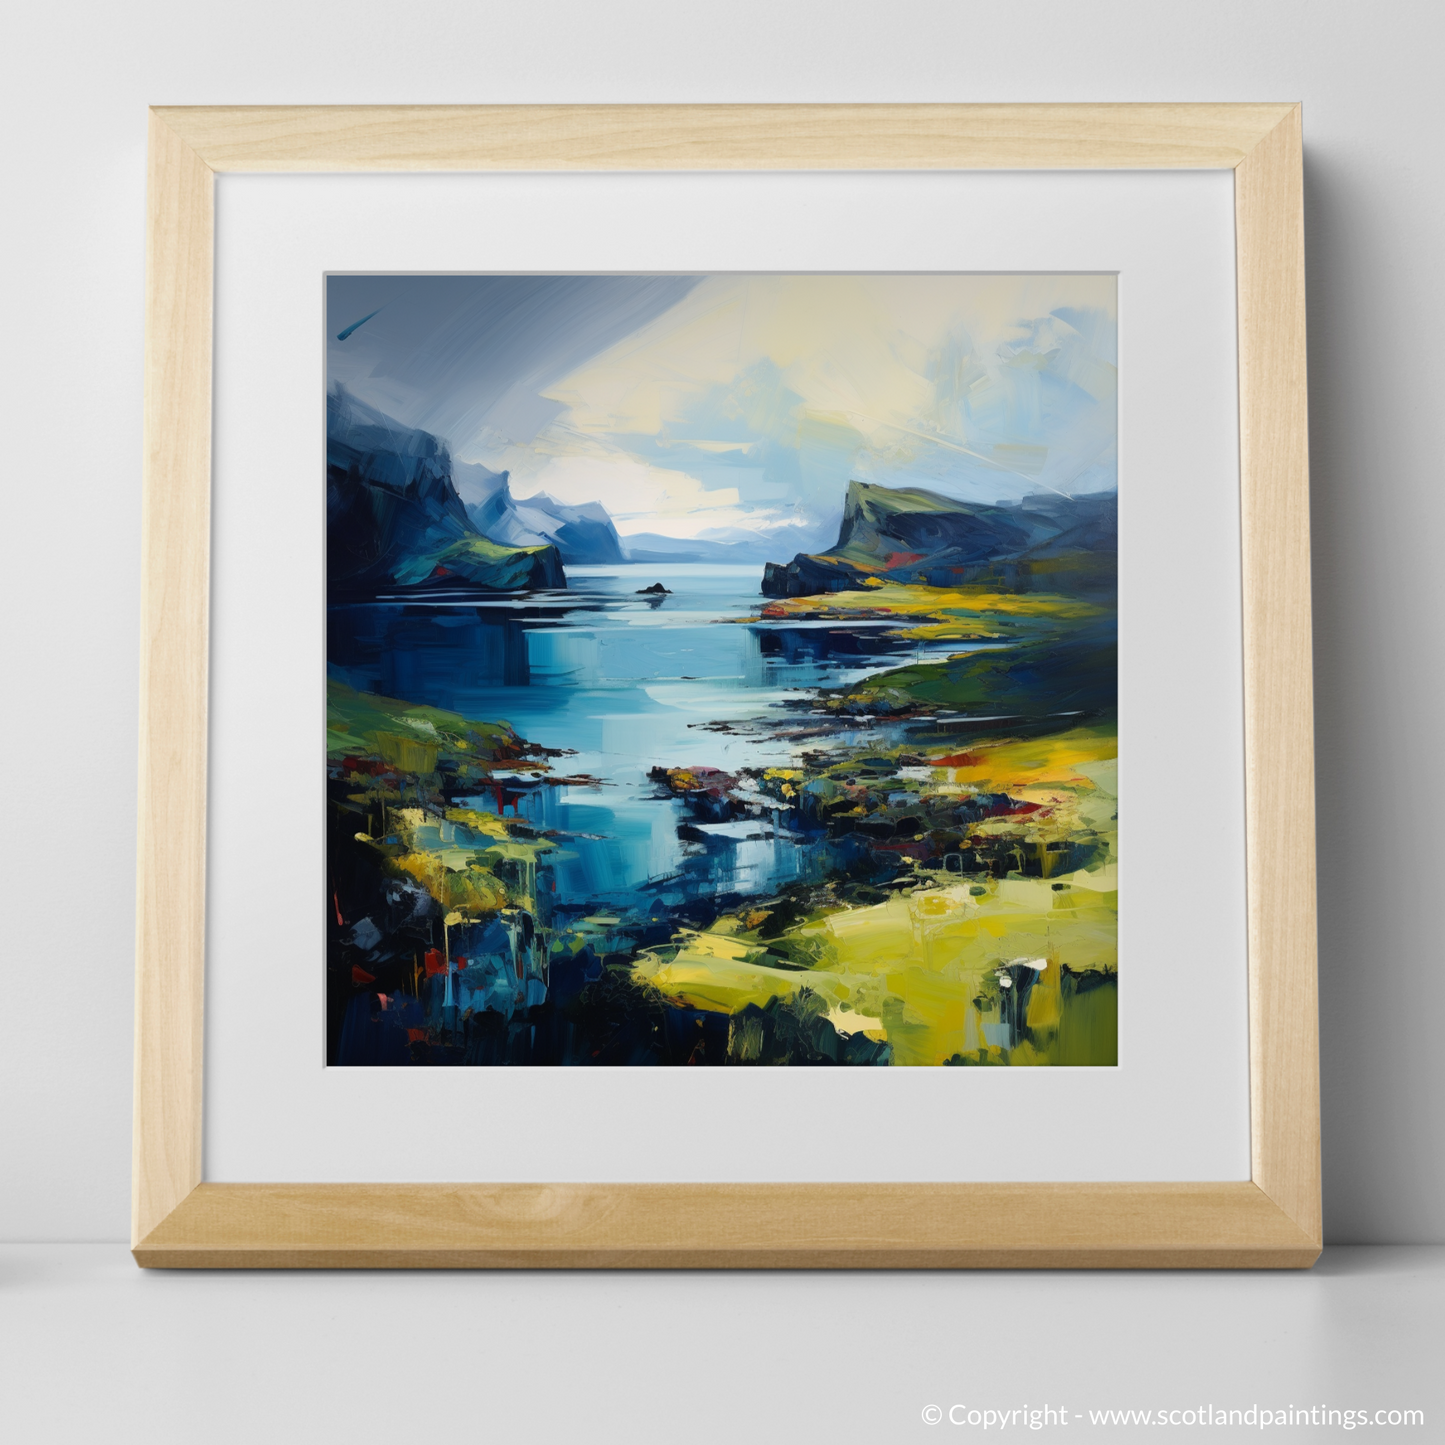 Art Print of Isle of Skye's smaller isles, Inner Hebrides with a natural frame